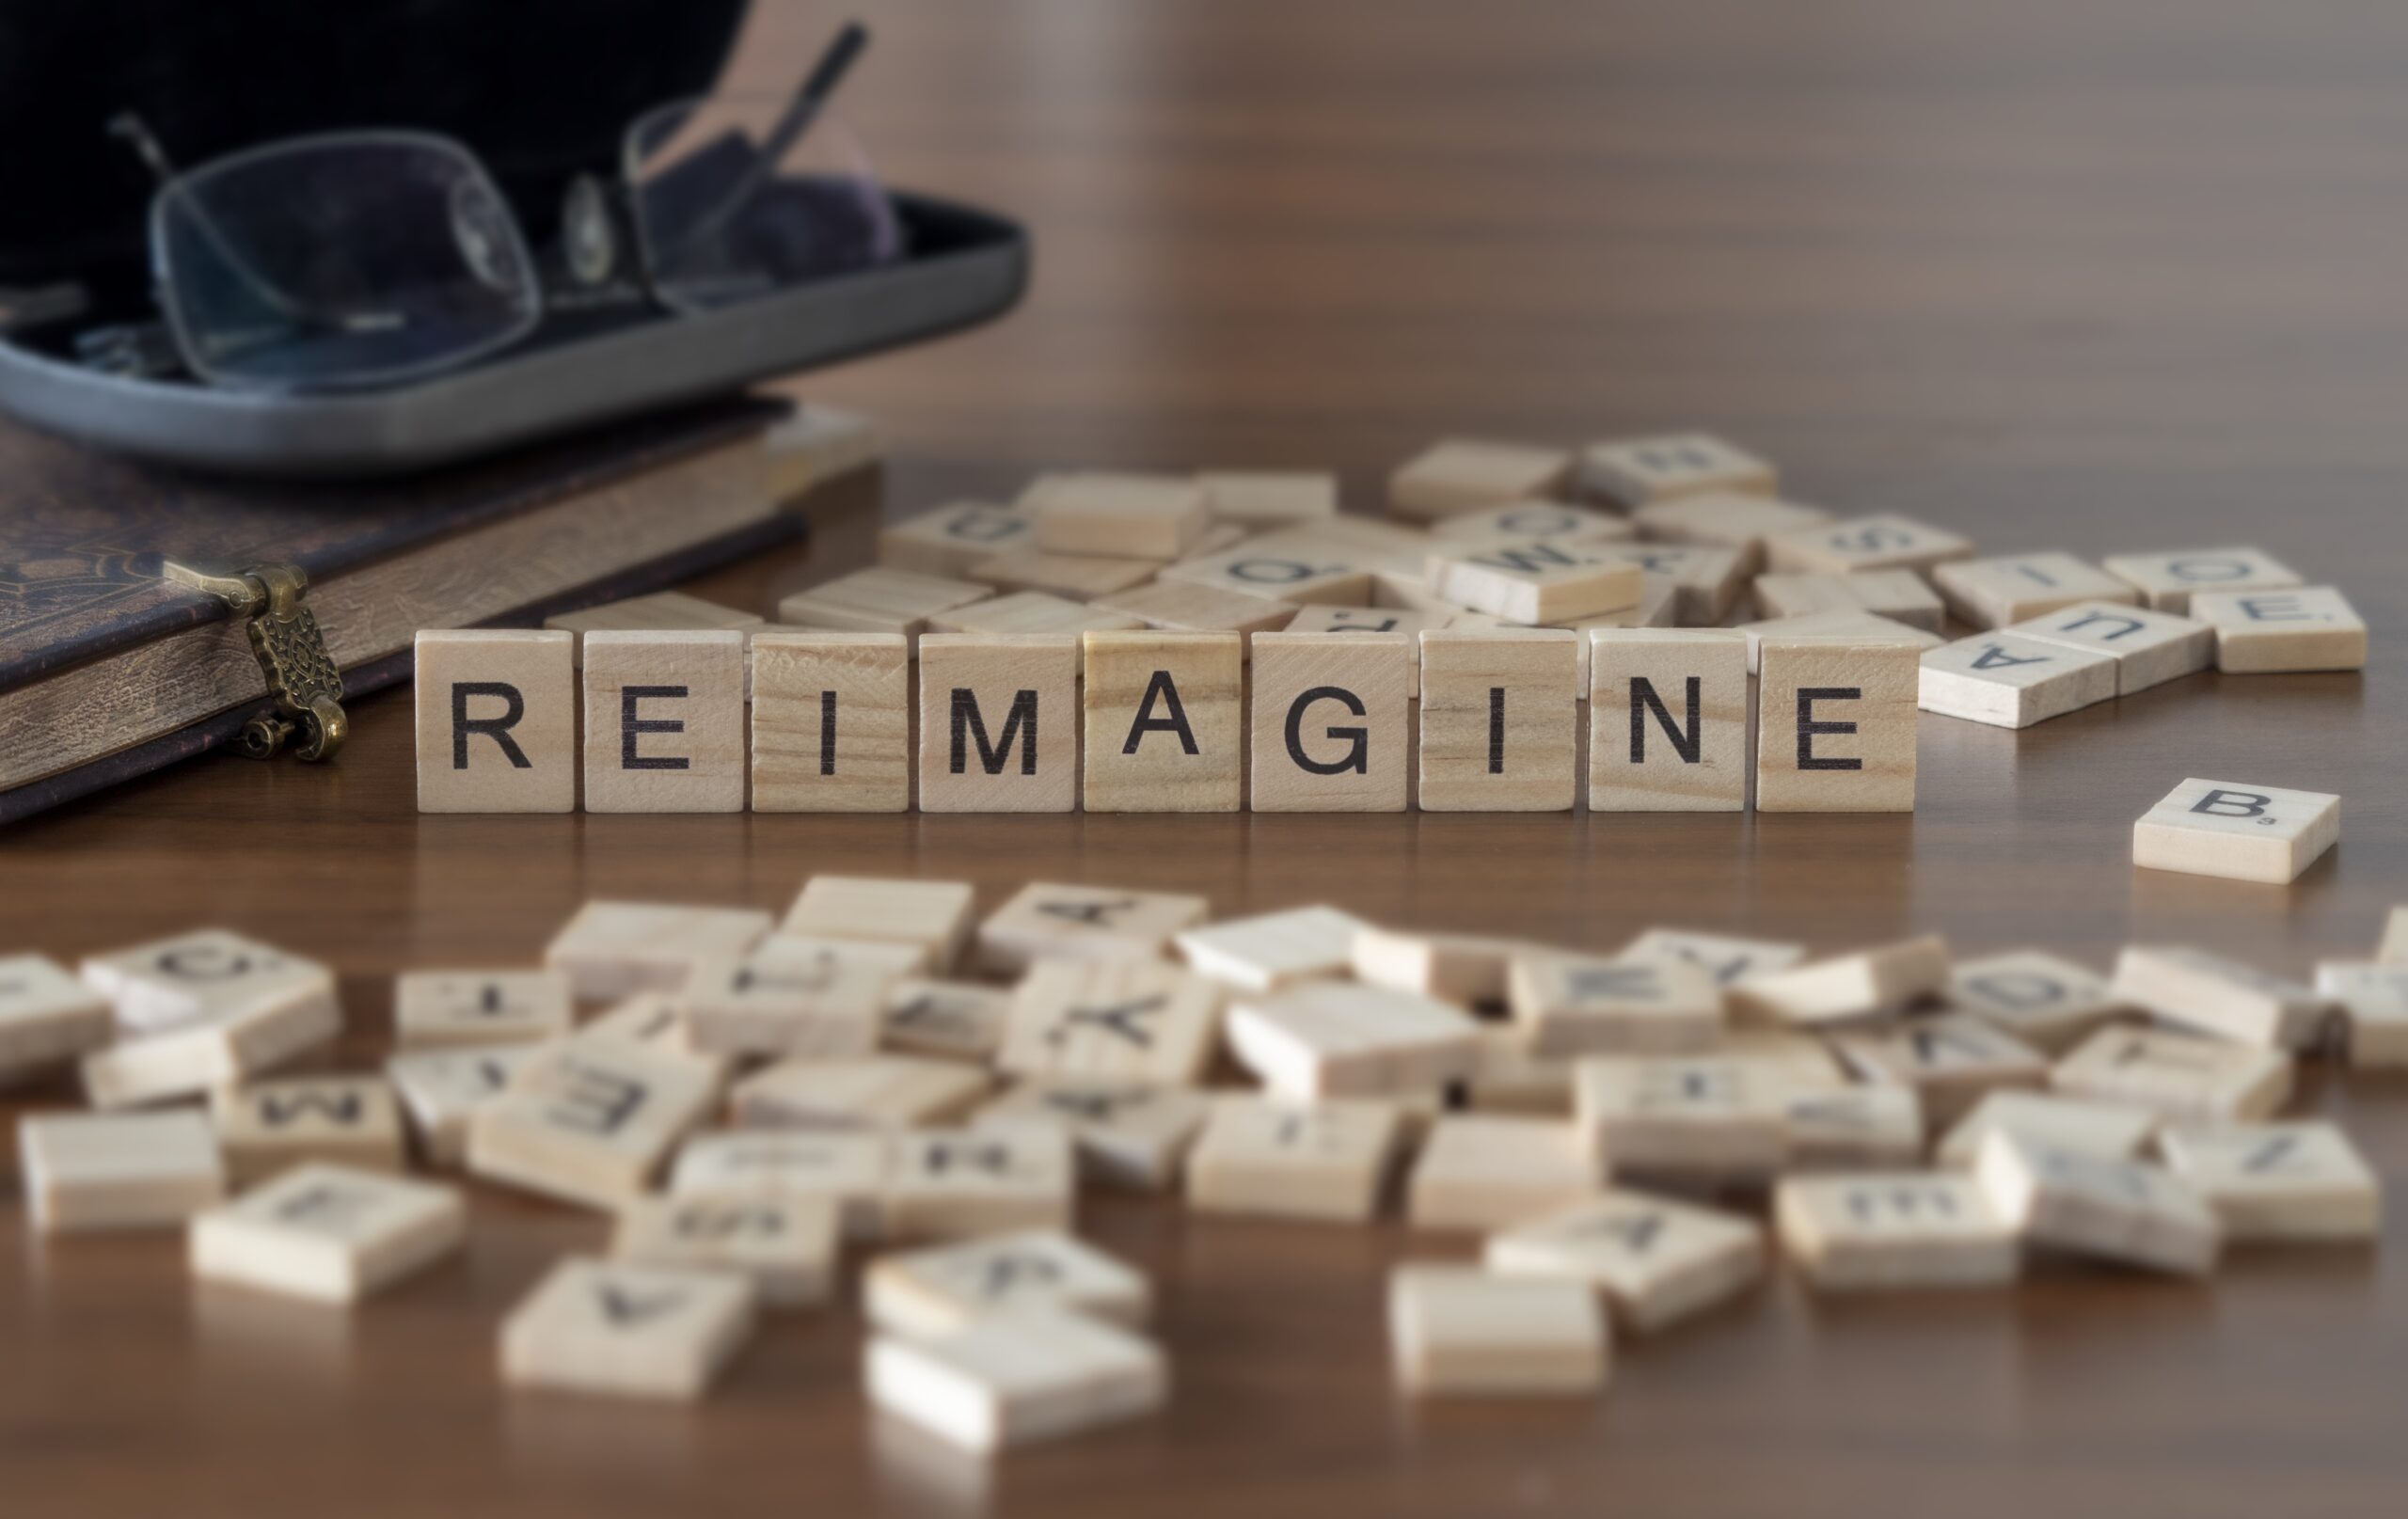 The concept of Reimagine represented by wooden letter tiles